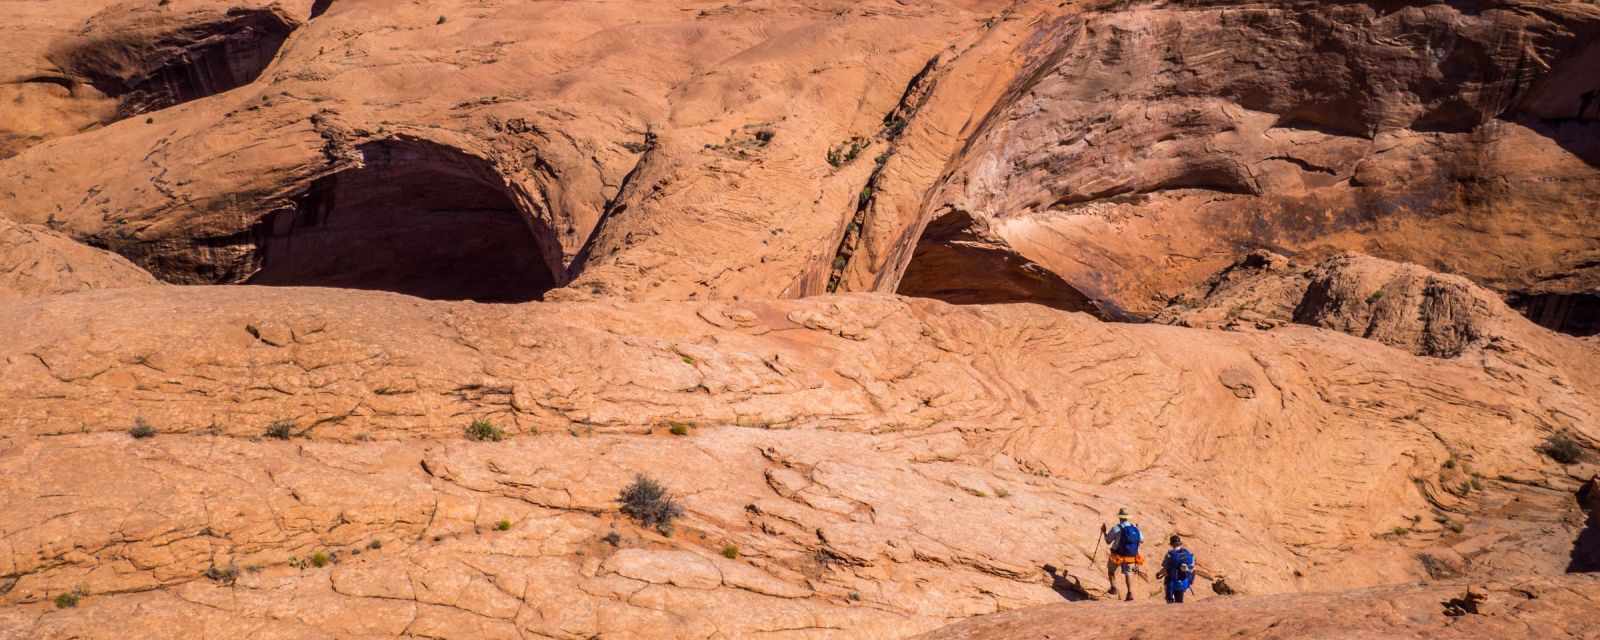 Jacob Hamblin Arch in the Coyote Gulch - Location - Map - Trail Details